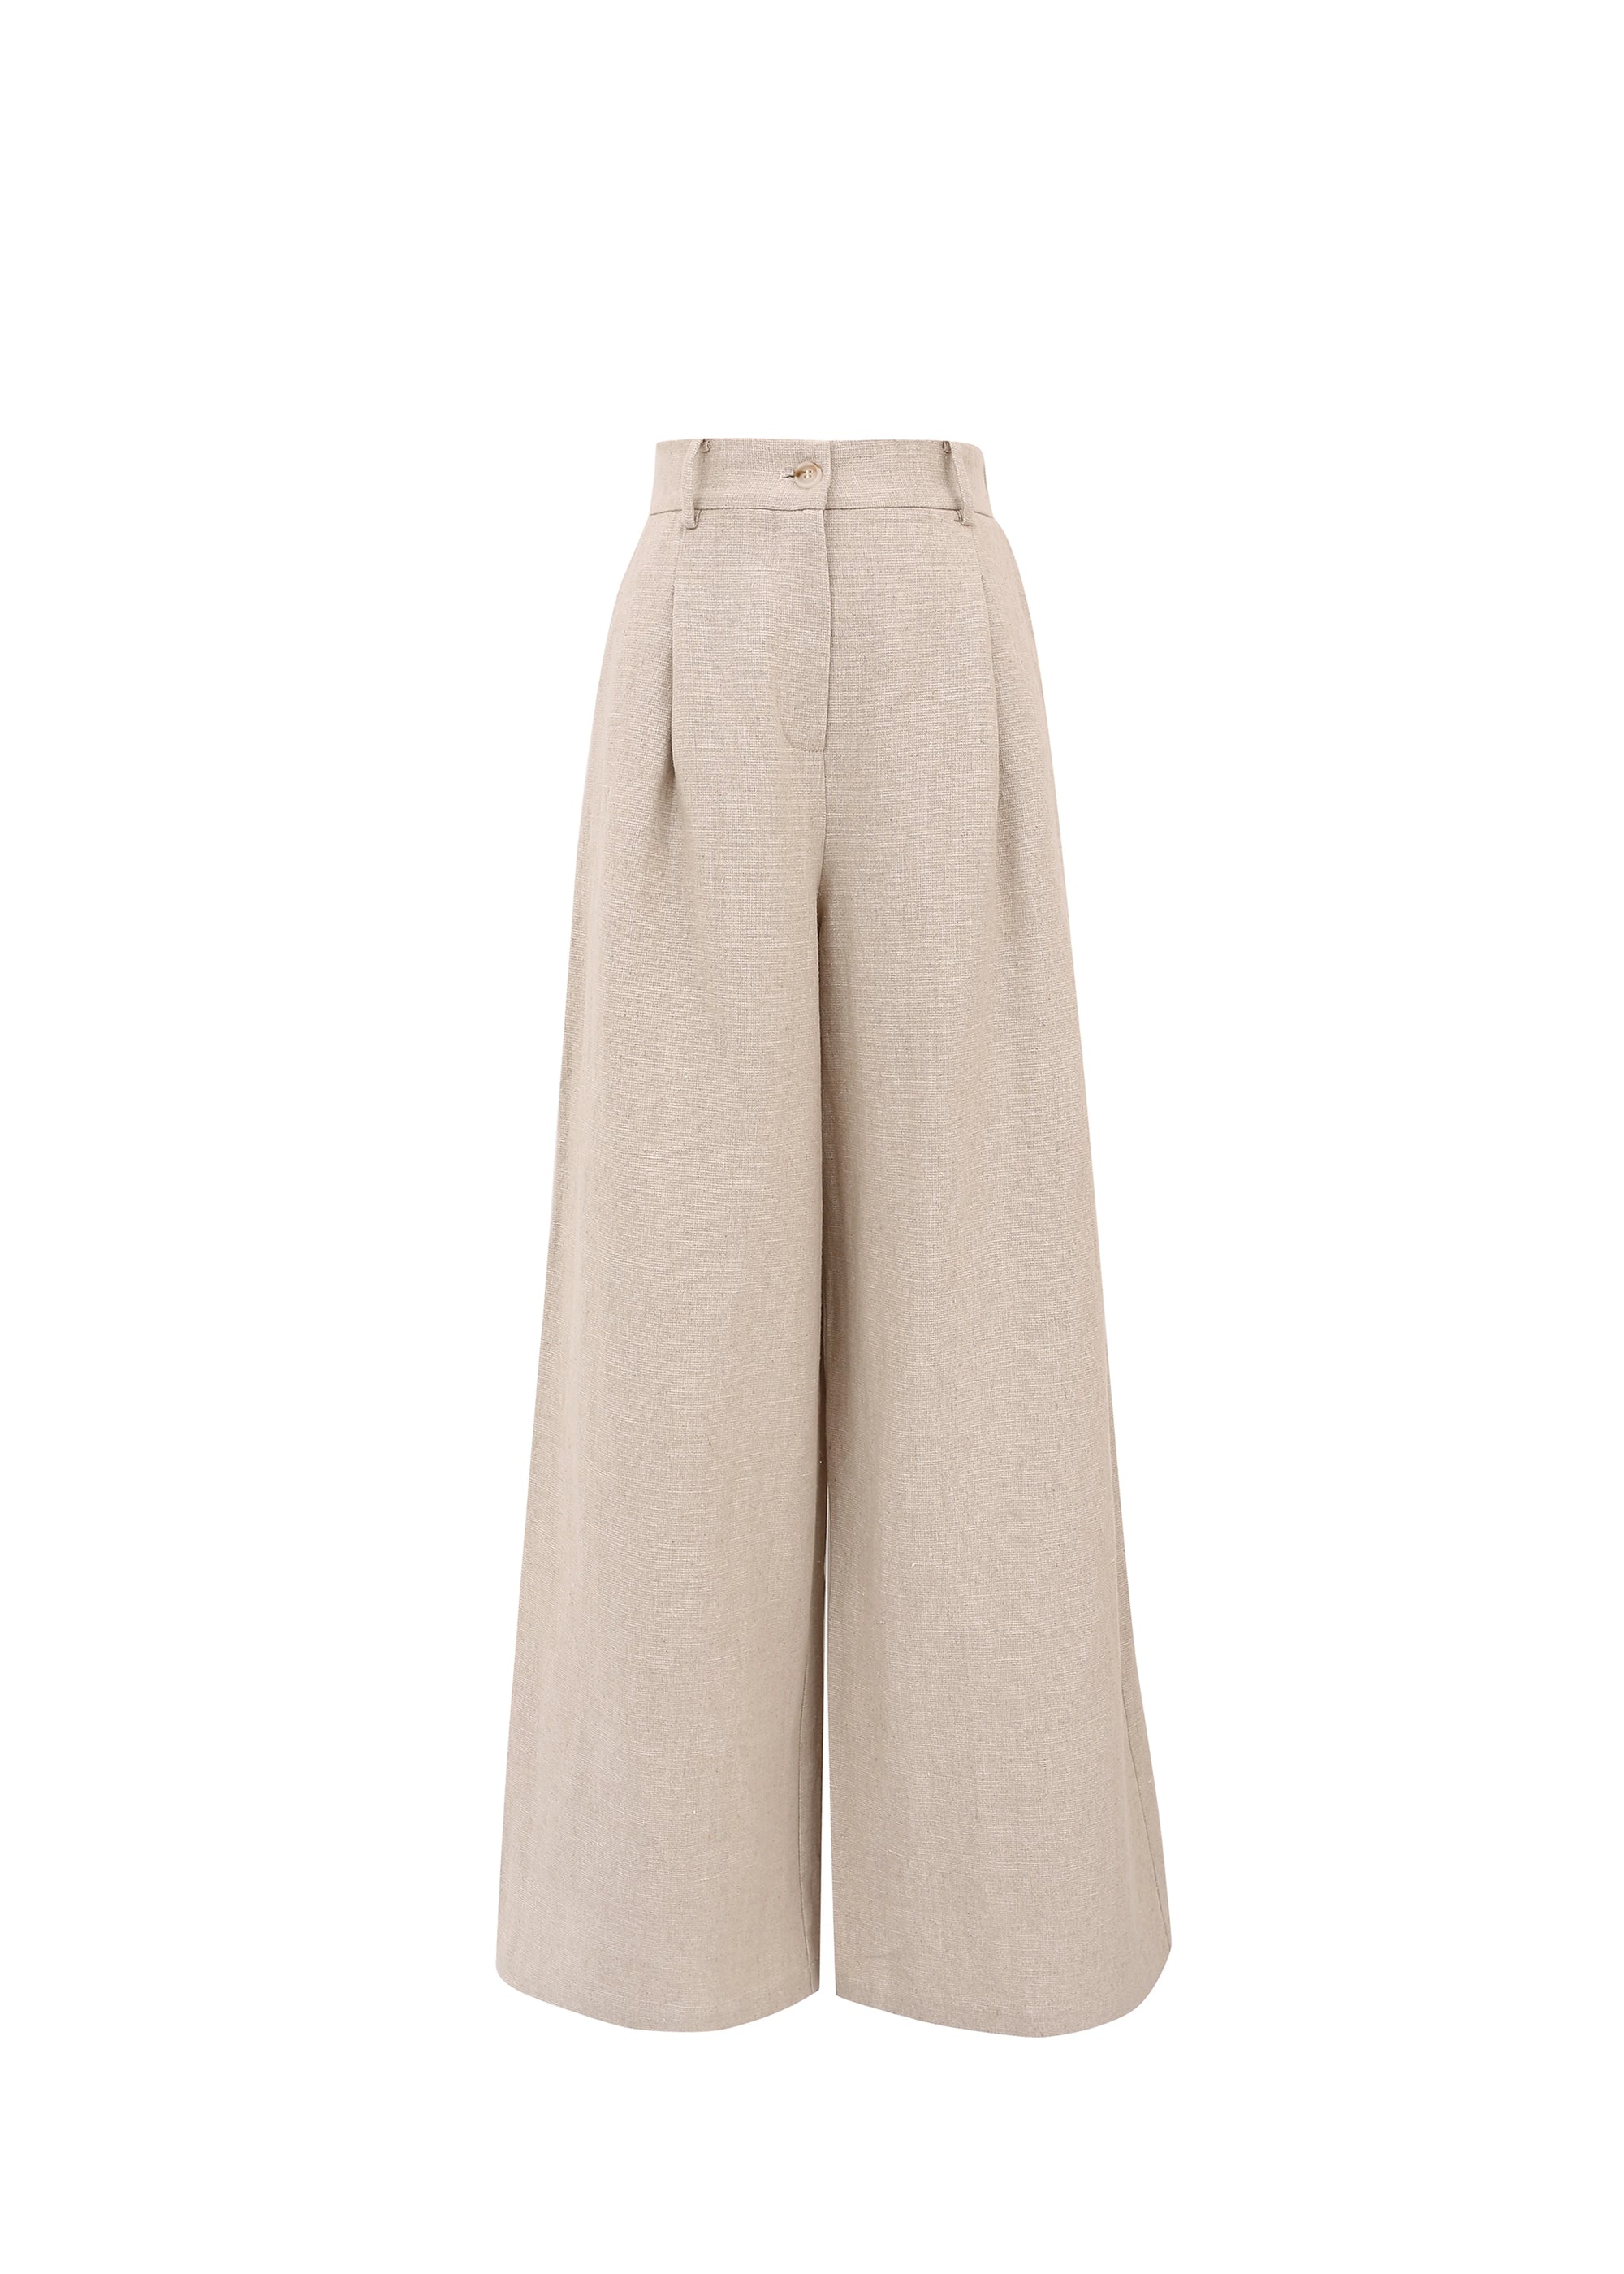 FRNCH Philo Woven Pants